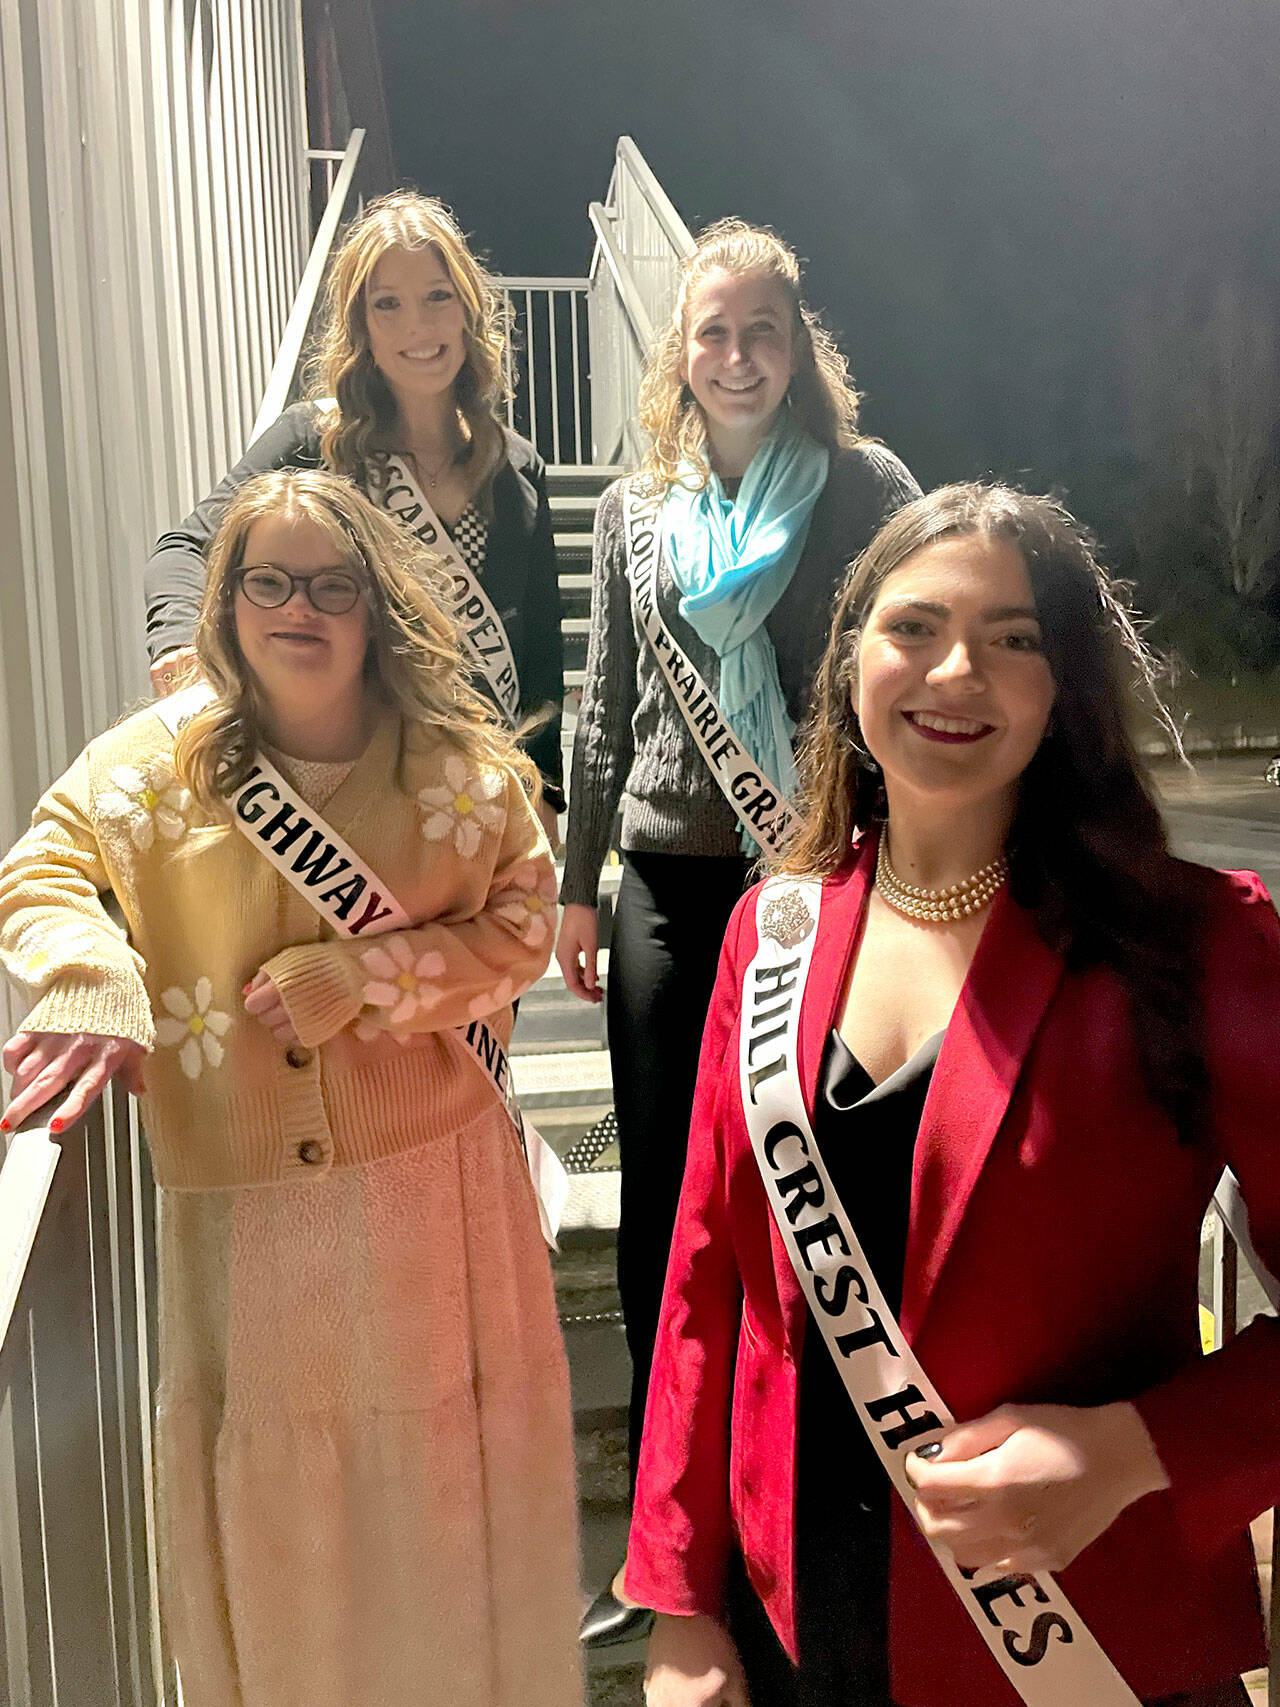 Sequim Gazette photo by Matthew Nash
Contestants for this year’s Irrigation Festival royalty include, clockwise from top left, Ellie Turner, Katherine Gould, Isabella Williams and Lauren Willis.